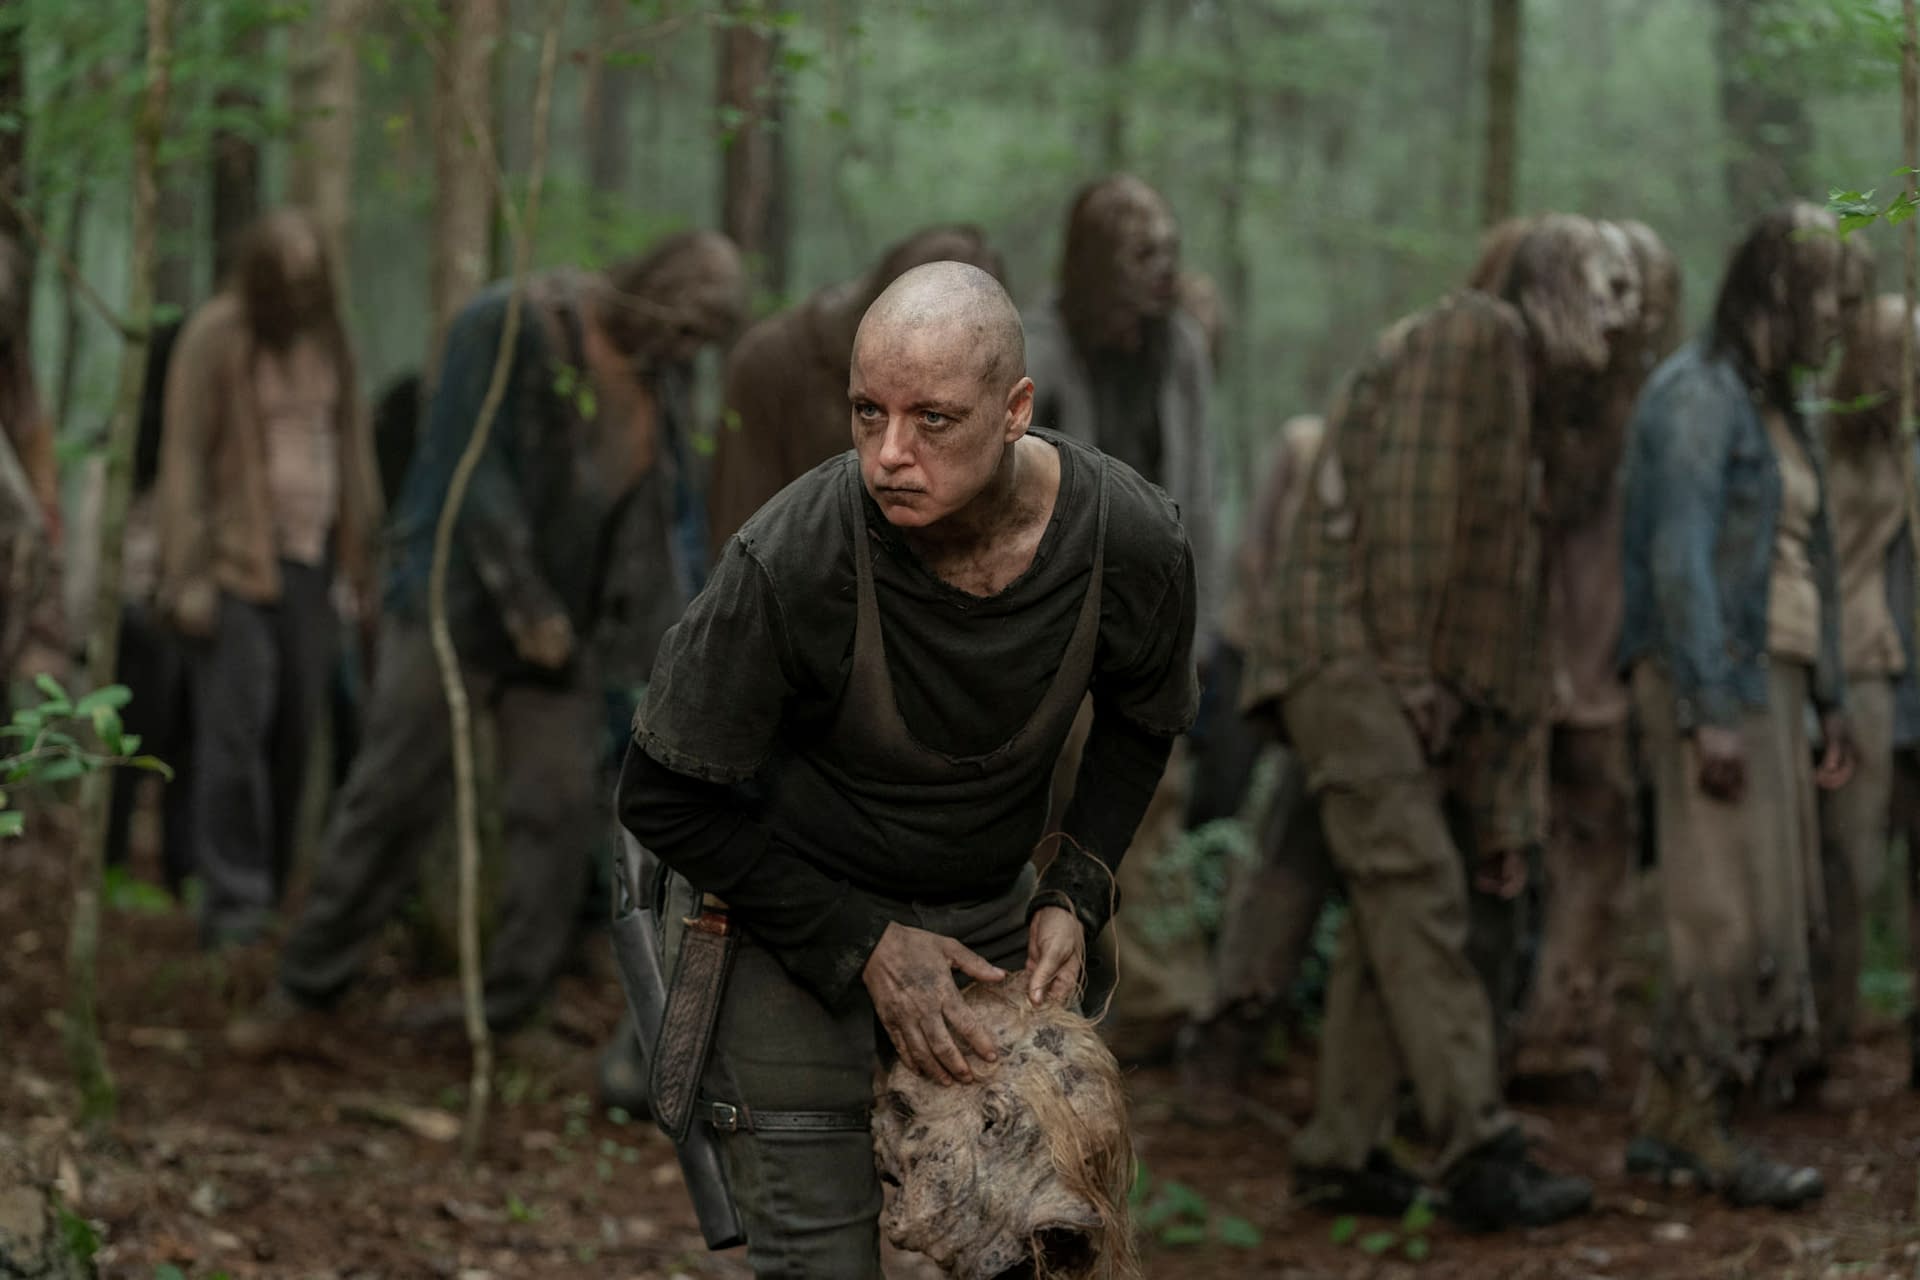 "The Walking Dead" Season 10: Samantha Morton, Ryan Hurst &#038; Thora Birch Set High Bar with "We Are the End of the World" [SPOILER REVIEW]